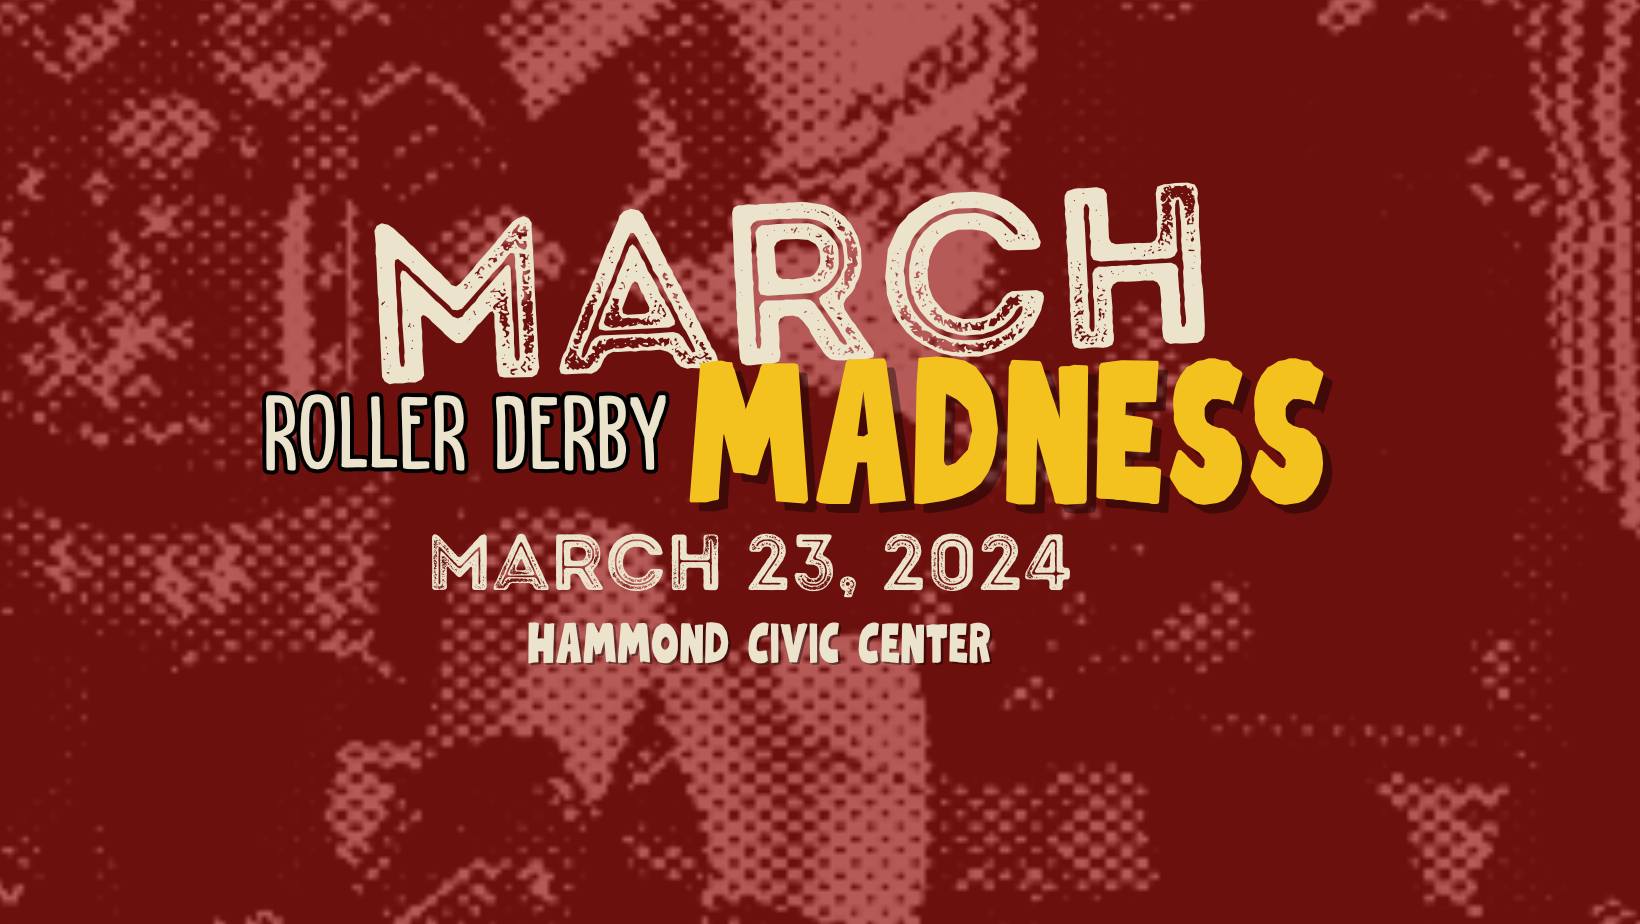 Roller derby extravaganza to take place in Valpo on Saturday